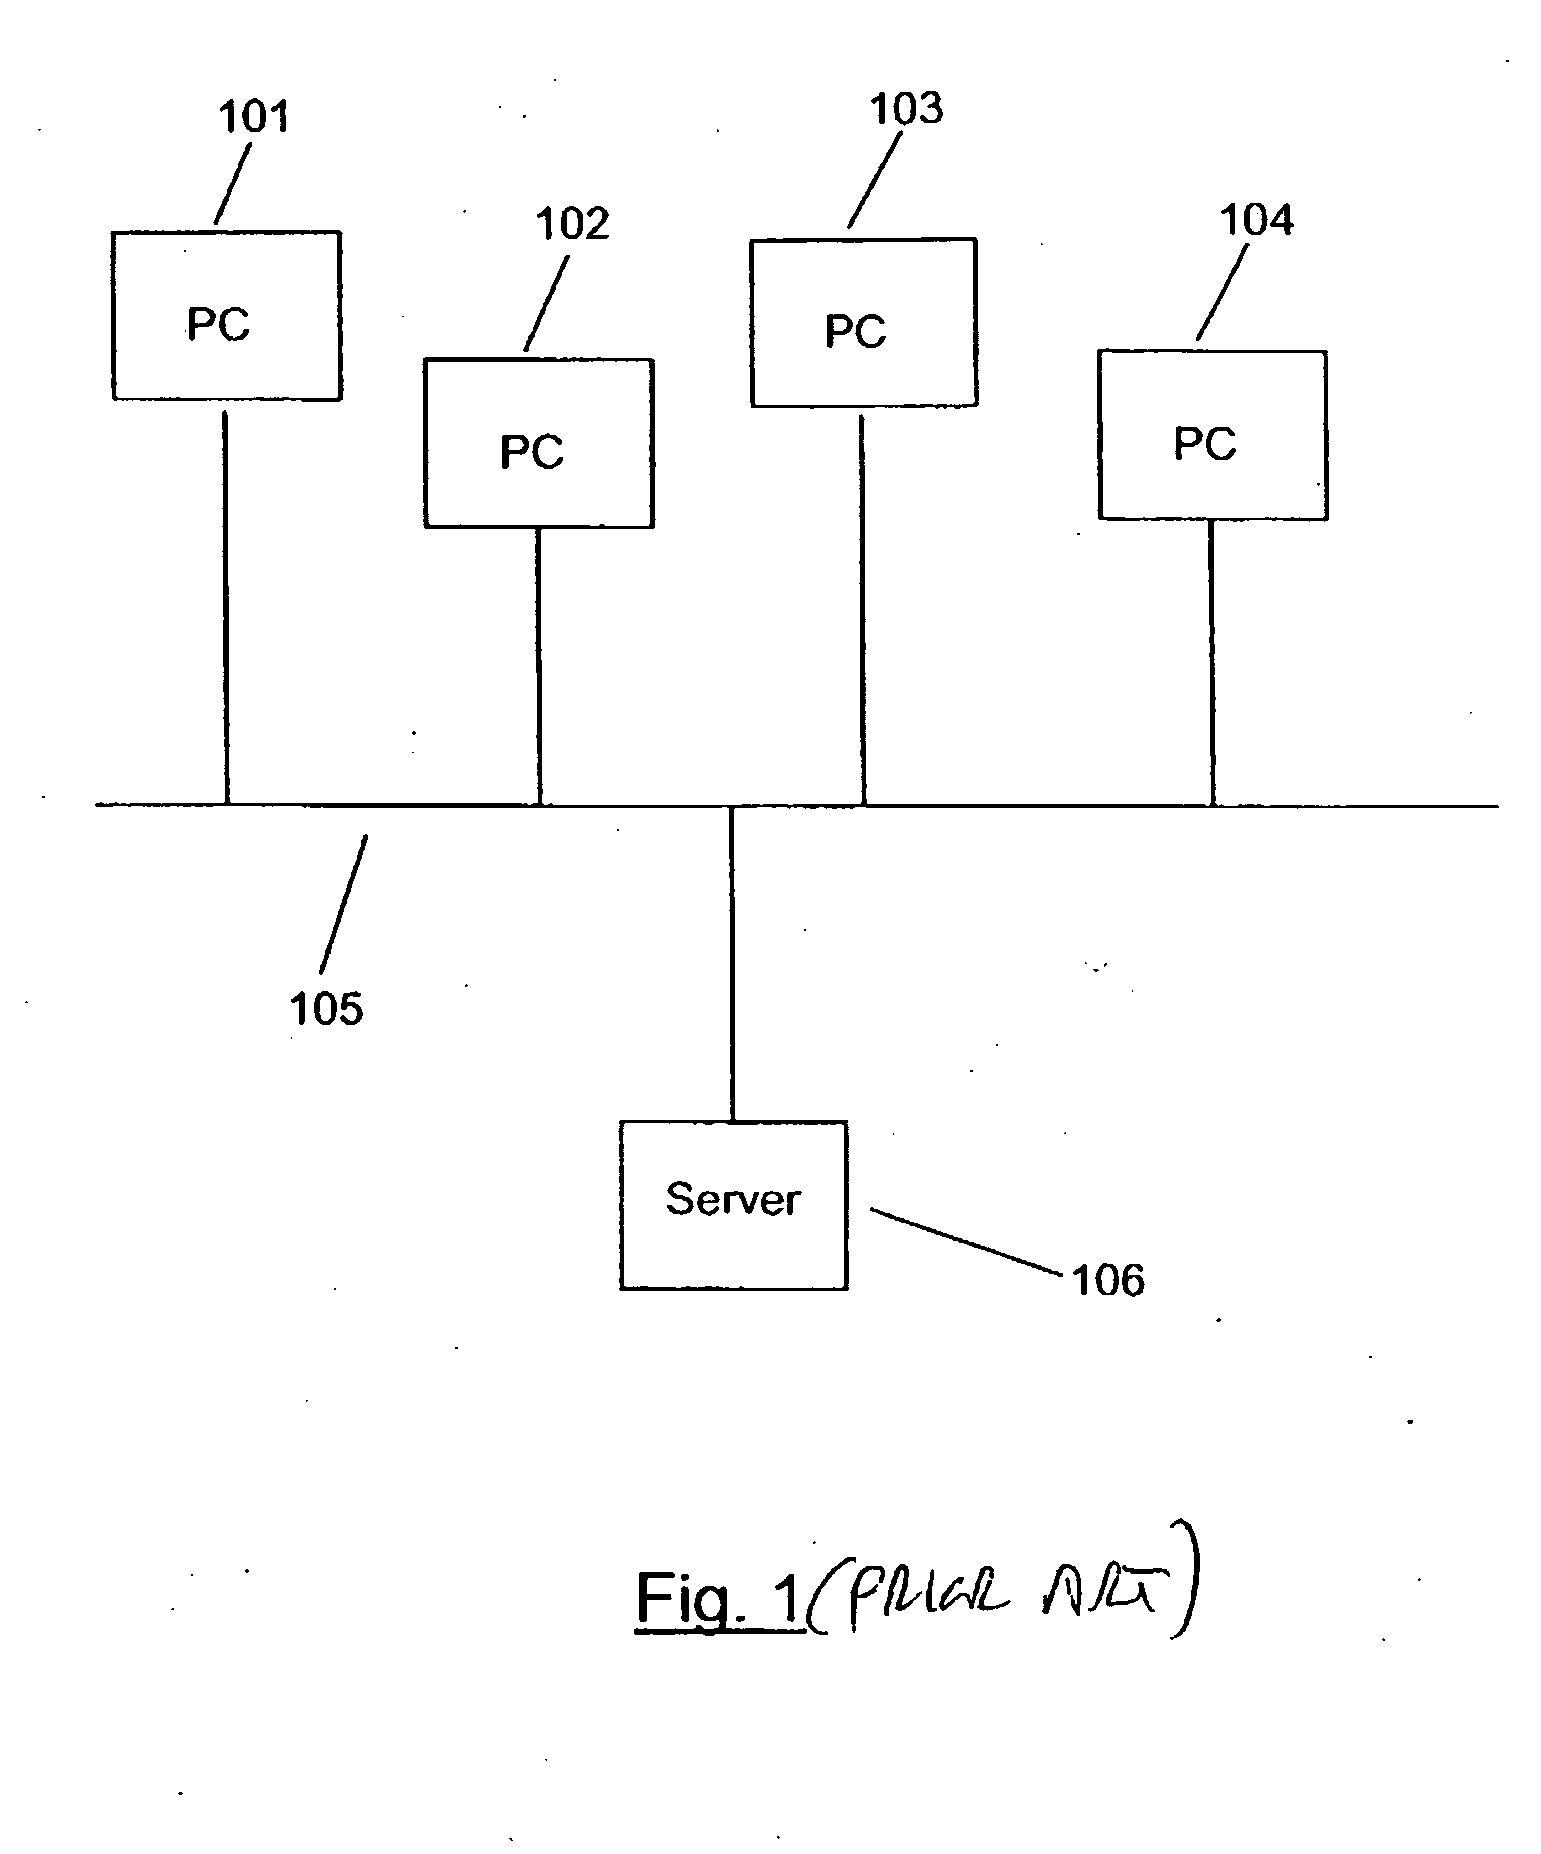 Method and apparatus for distribution and installation of computer programs across an enterprise